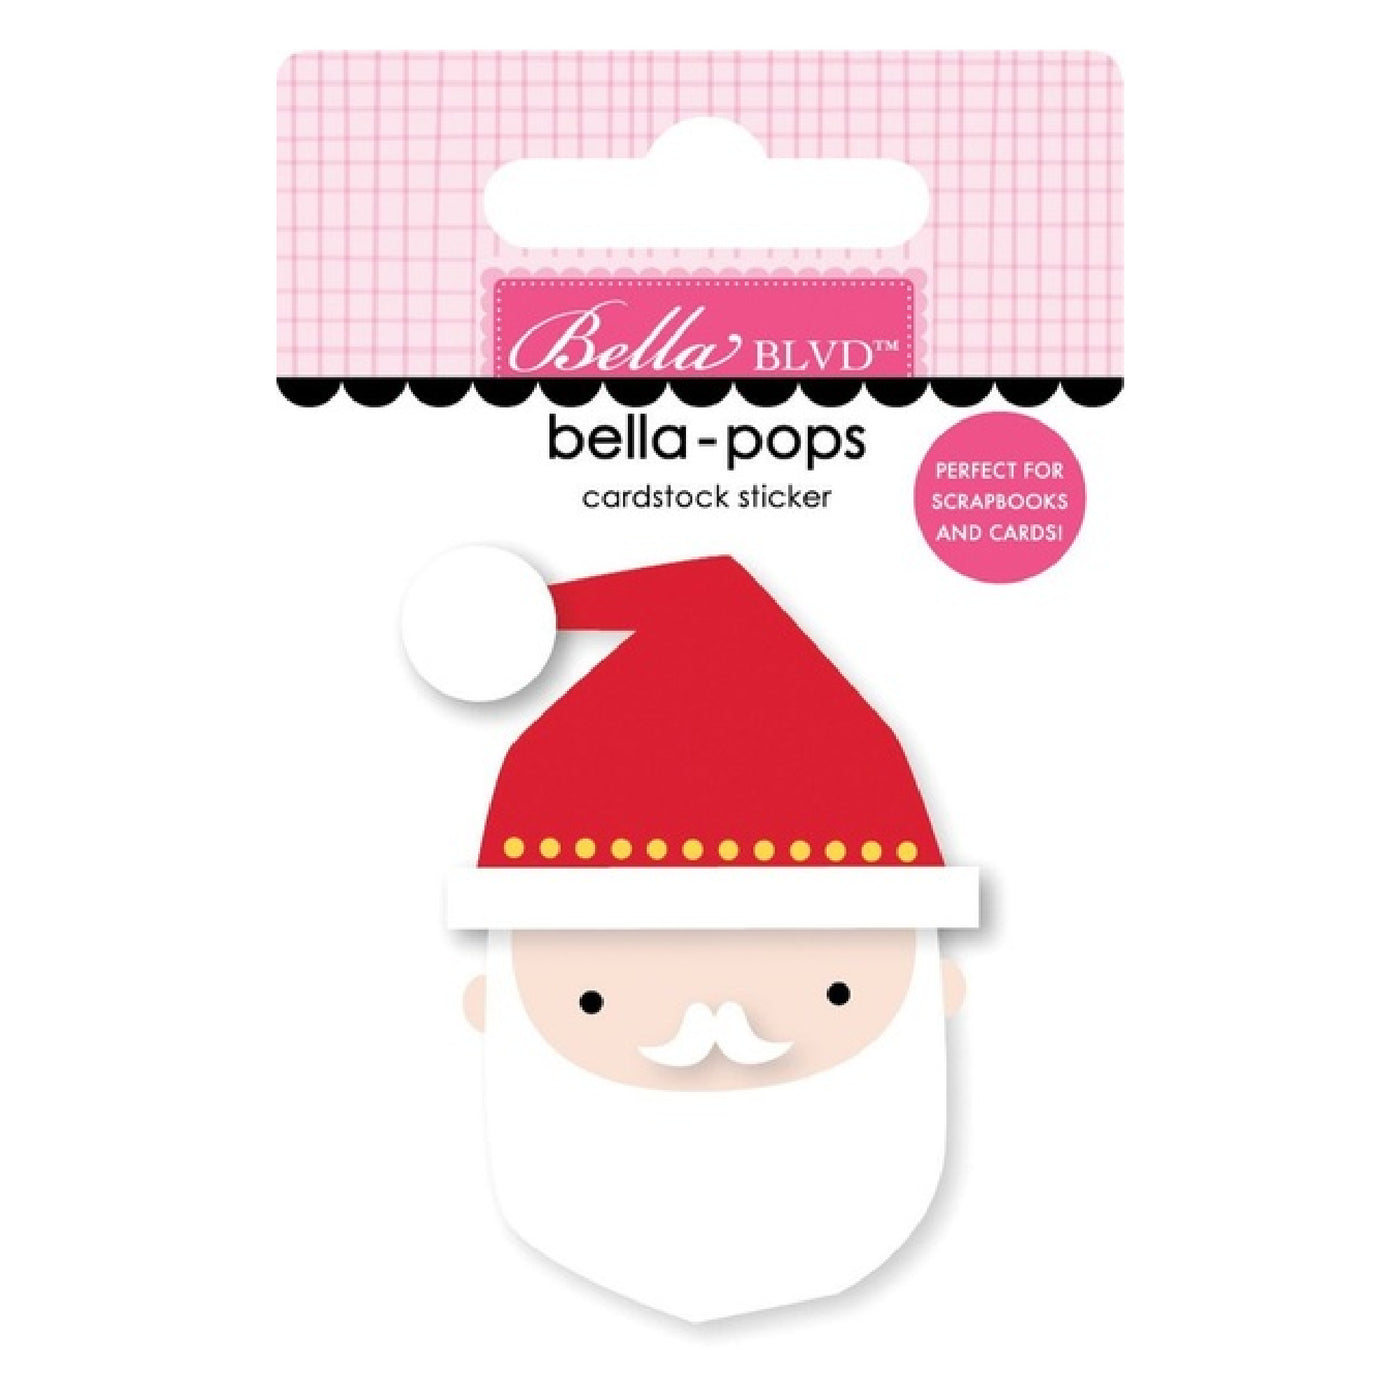 This adorable little Santa head Bella-pop is perfect for cardmaking, scrapbook pages, journals, tags, and more.